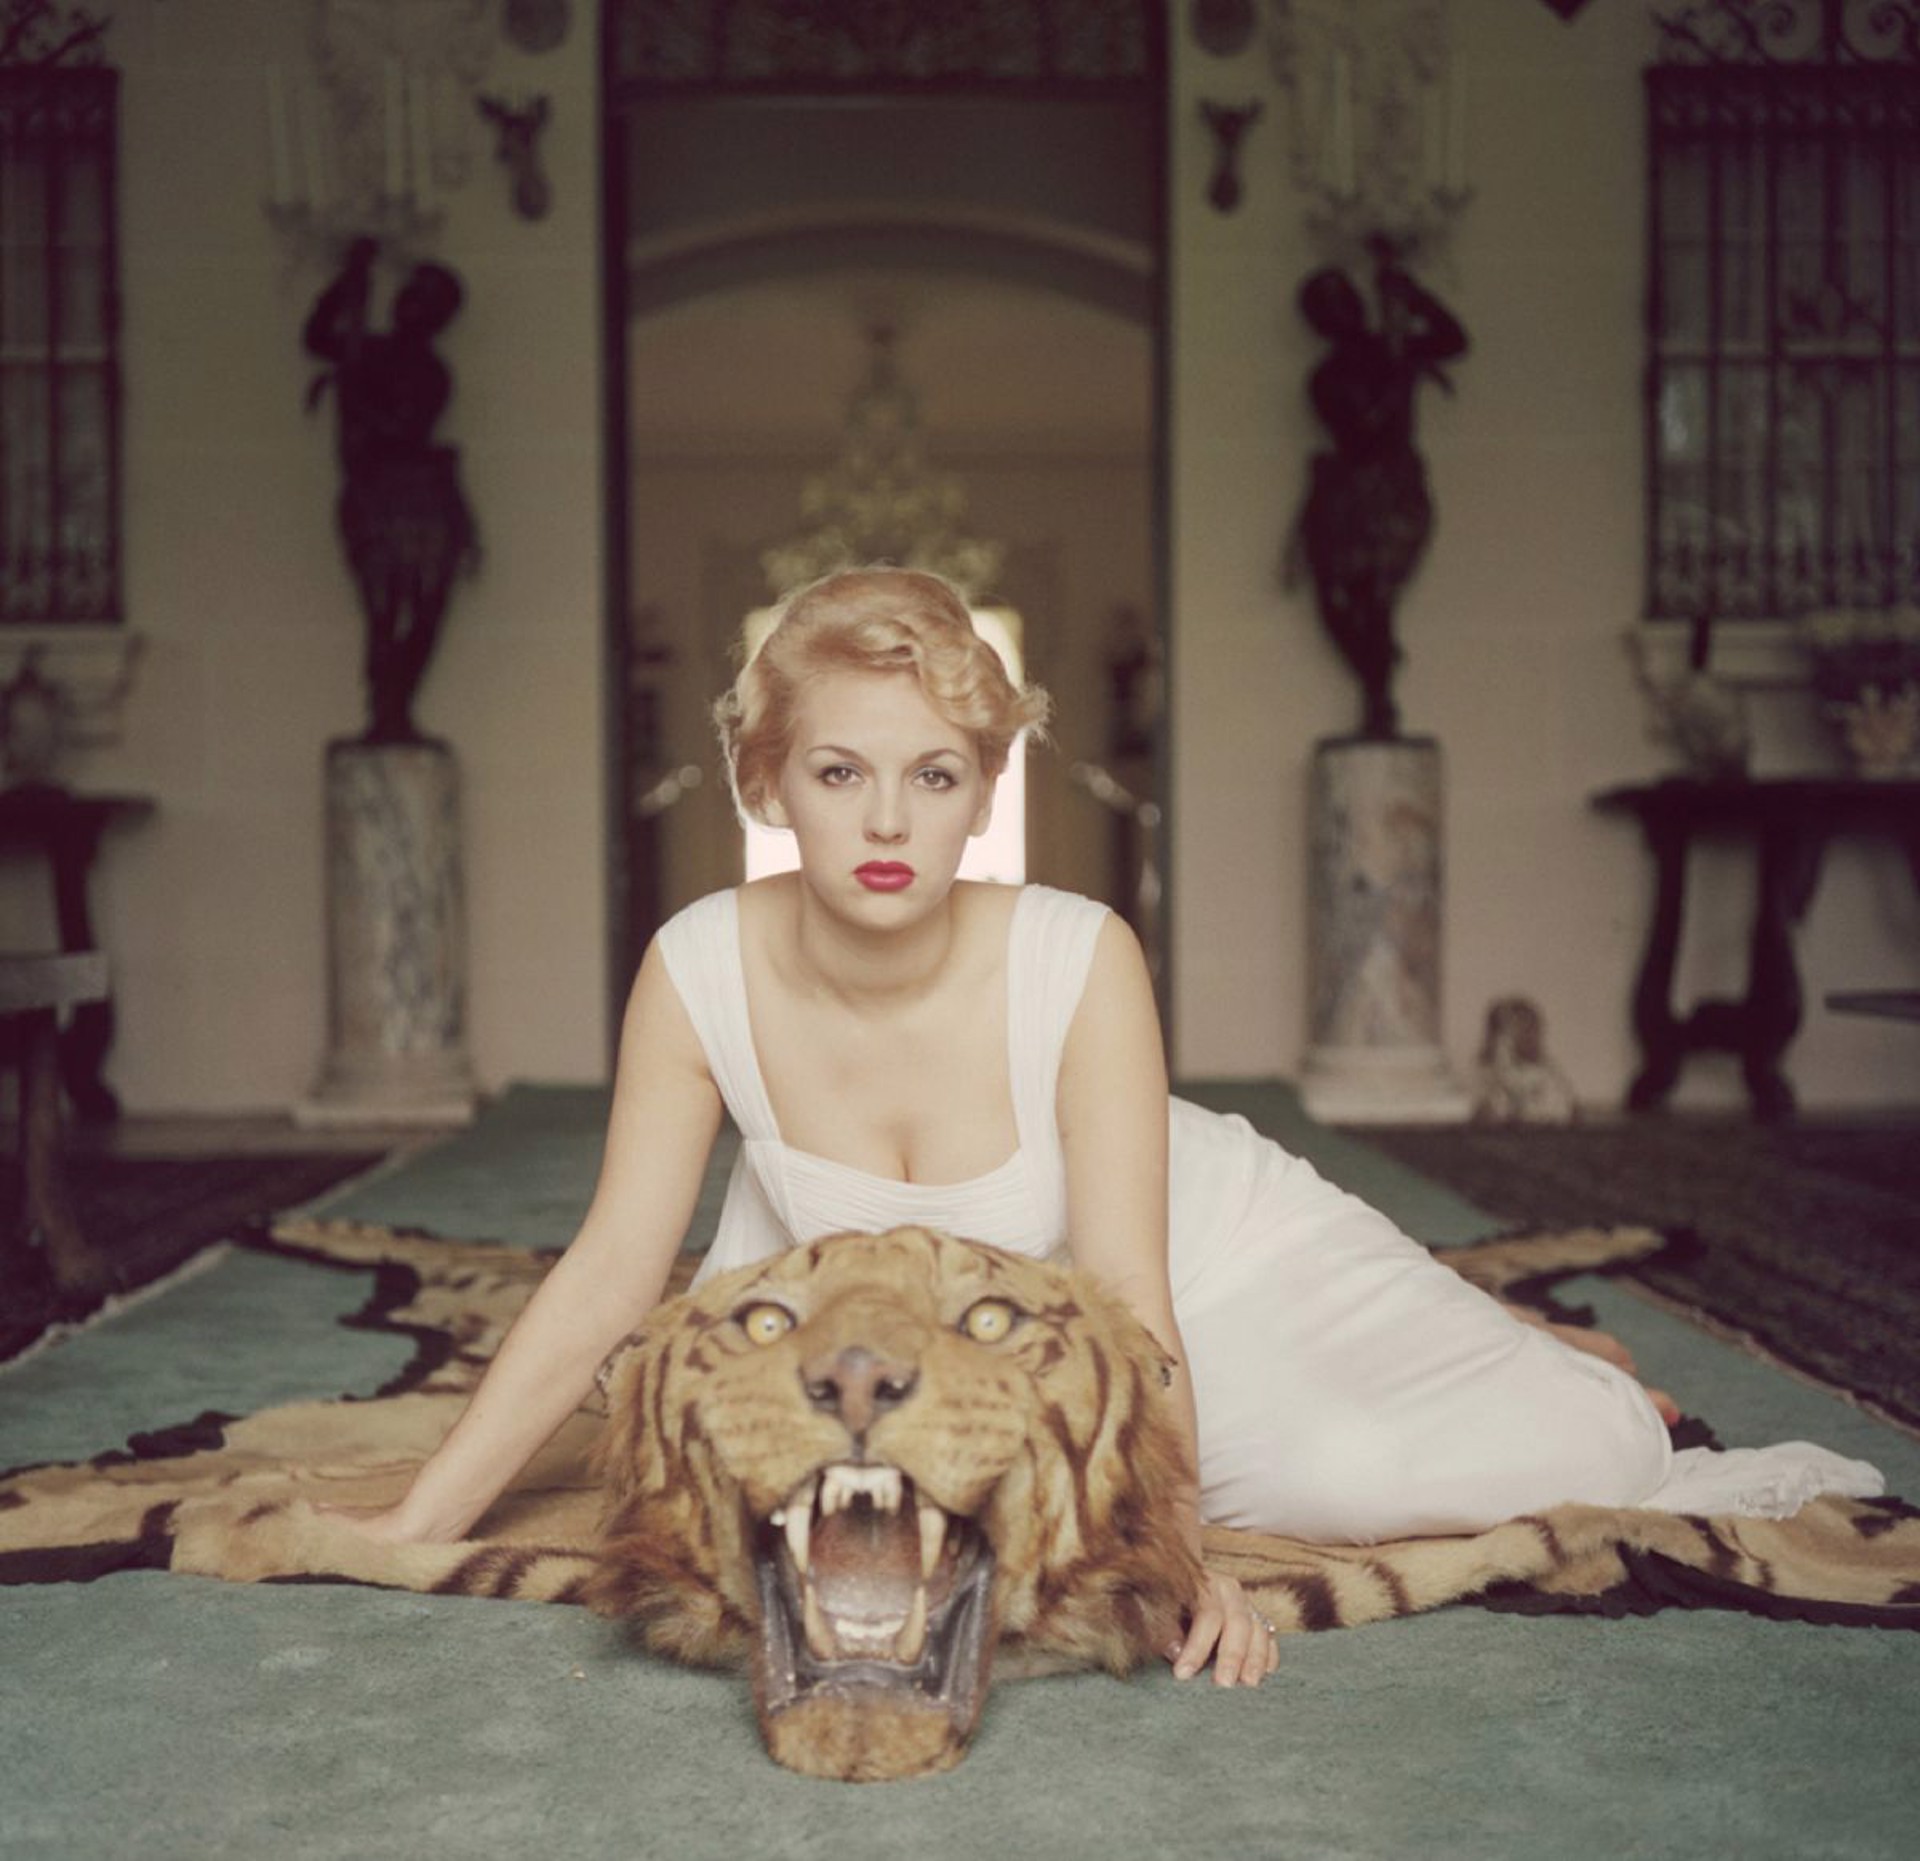 Beauty and the Beast by Slim Aarons